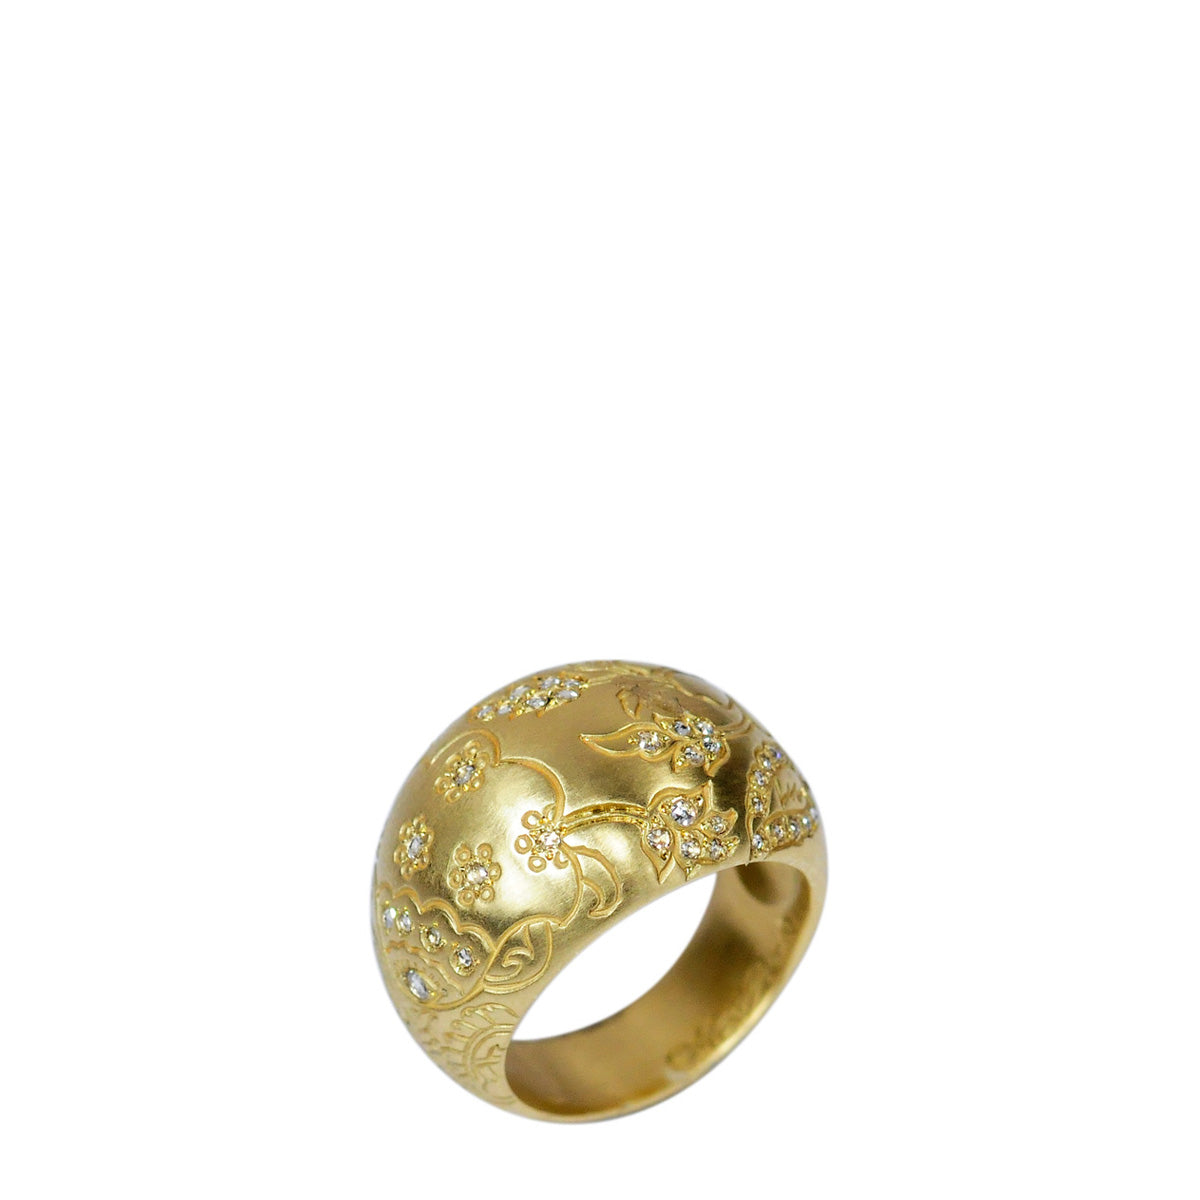 18K Gold Engraved Paisley Dome Ring with Diamonds